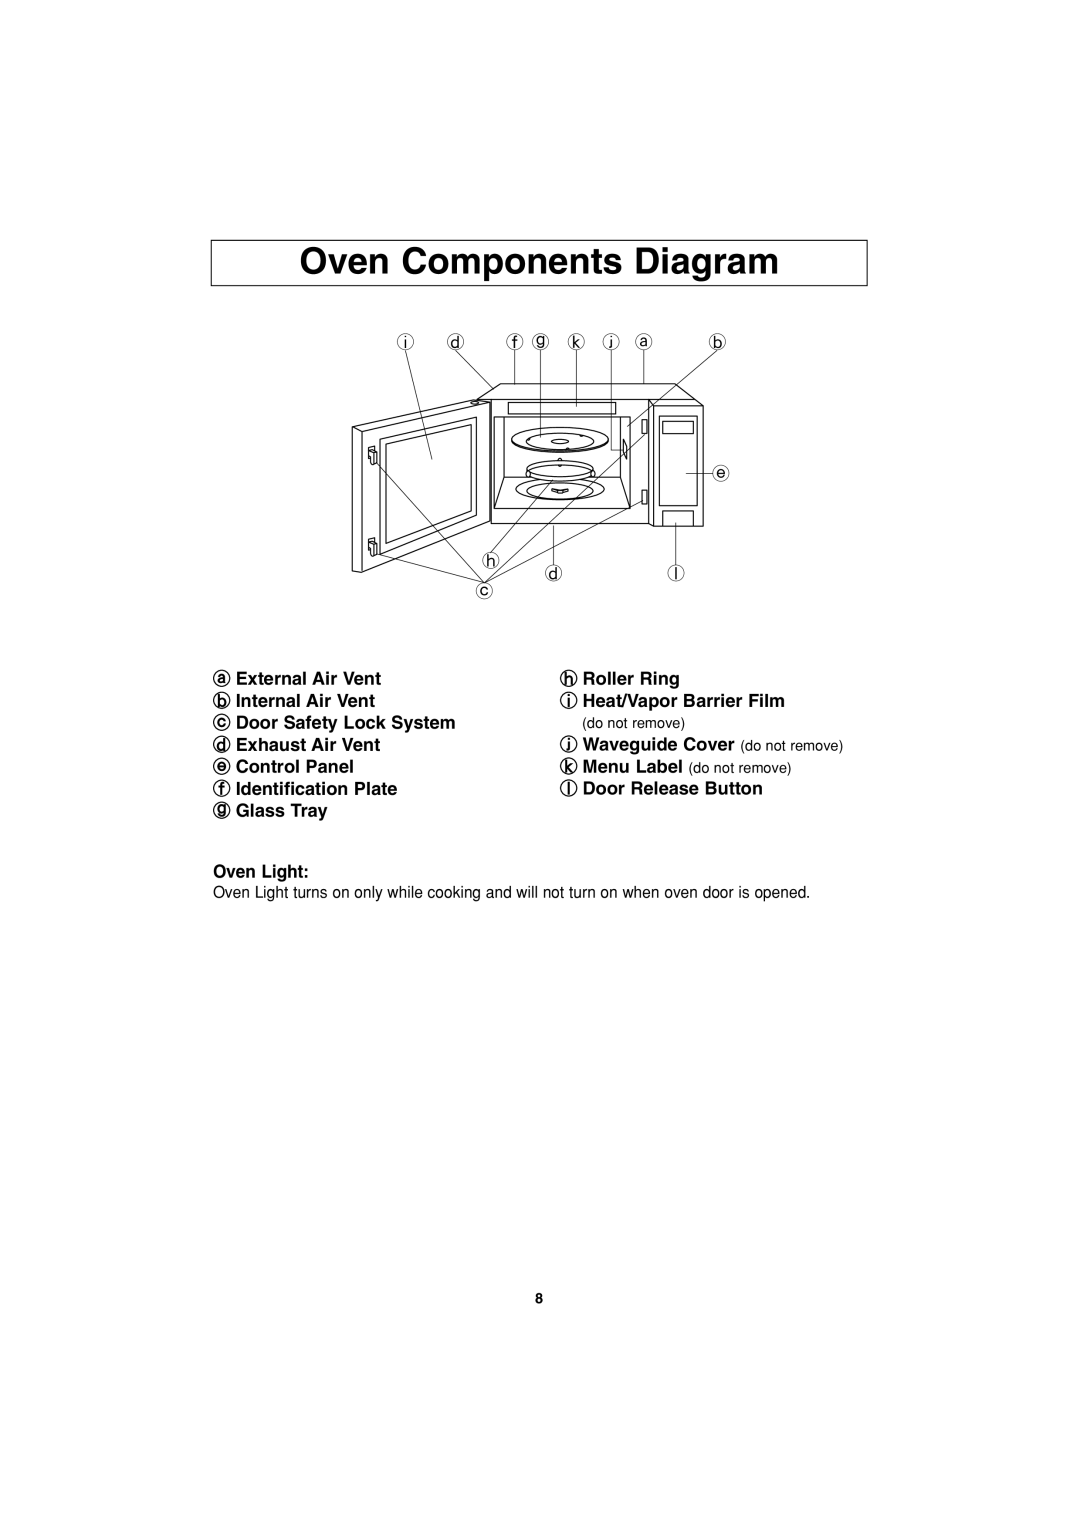 Panasonic NN-S423 important safety instructions Oven Components Diagram 